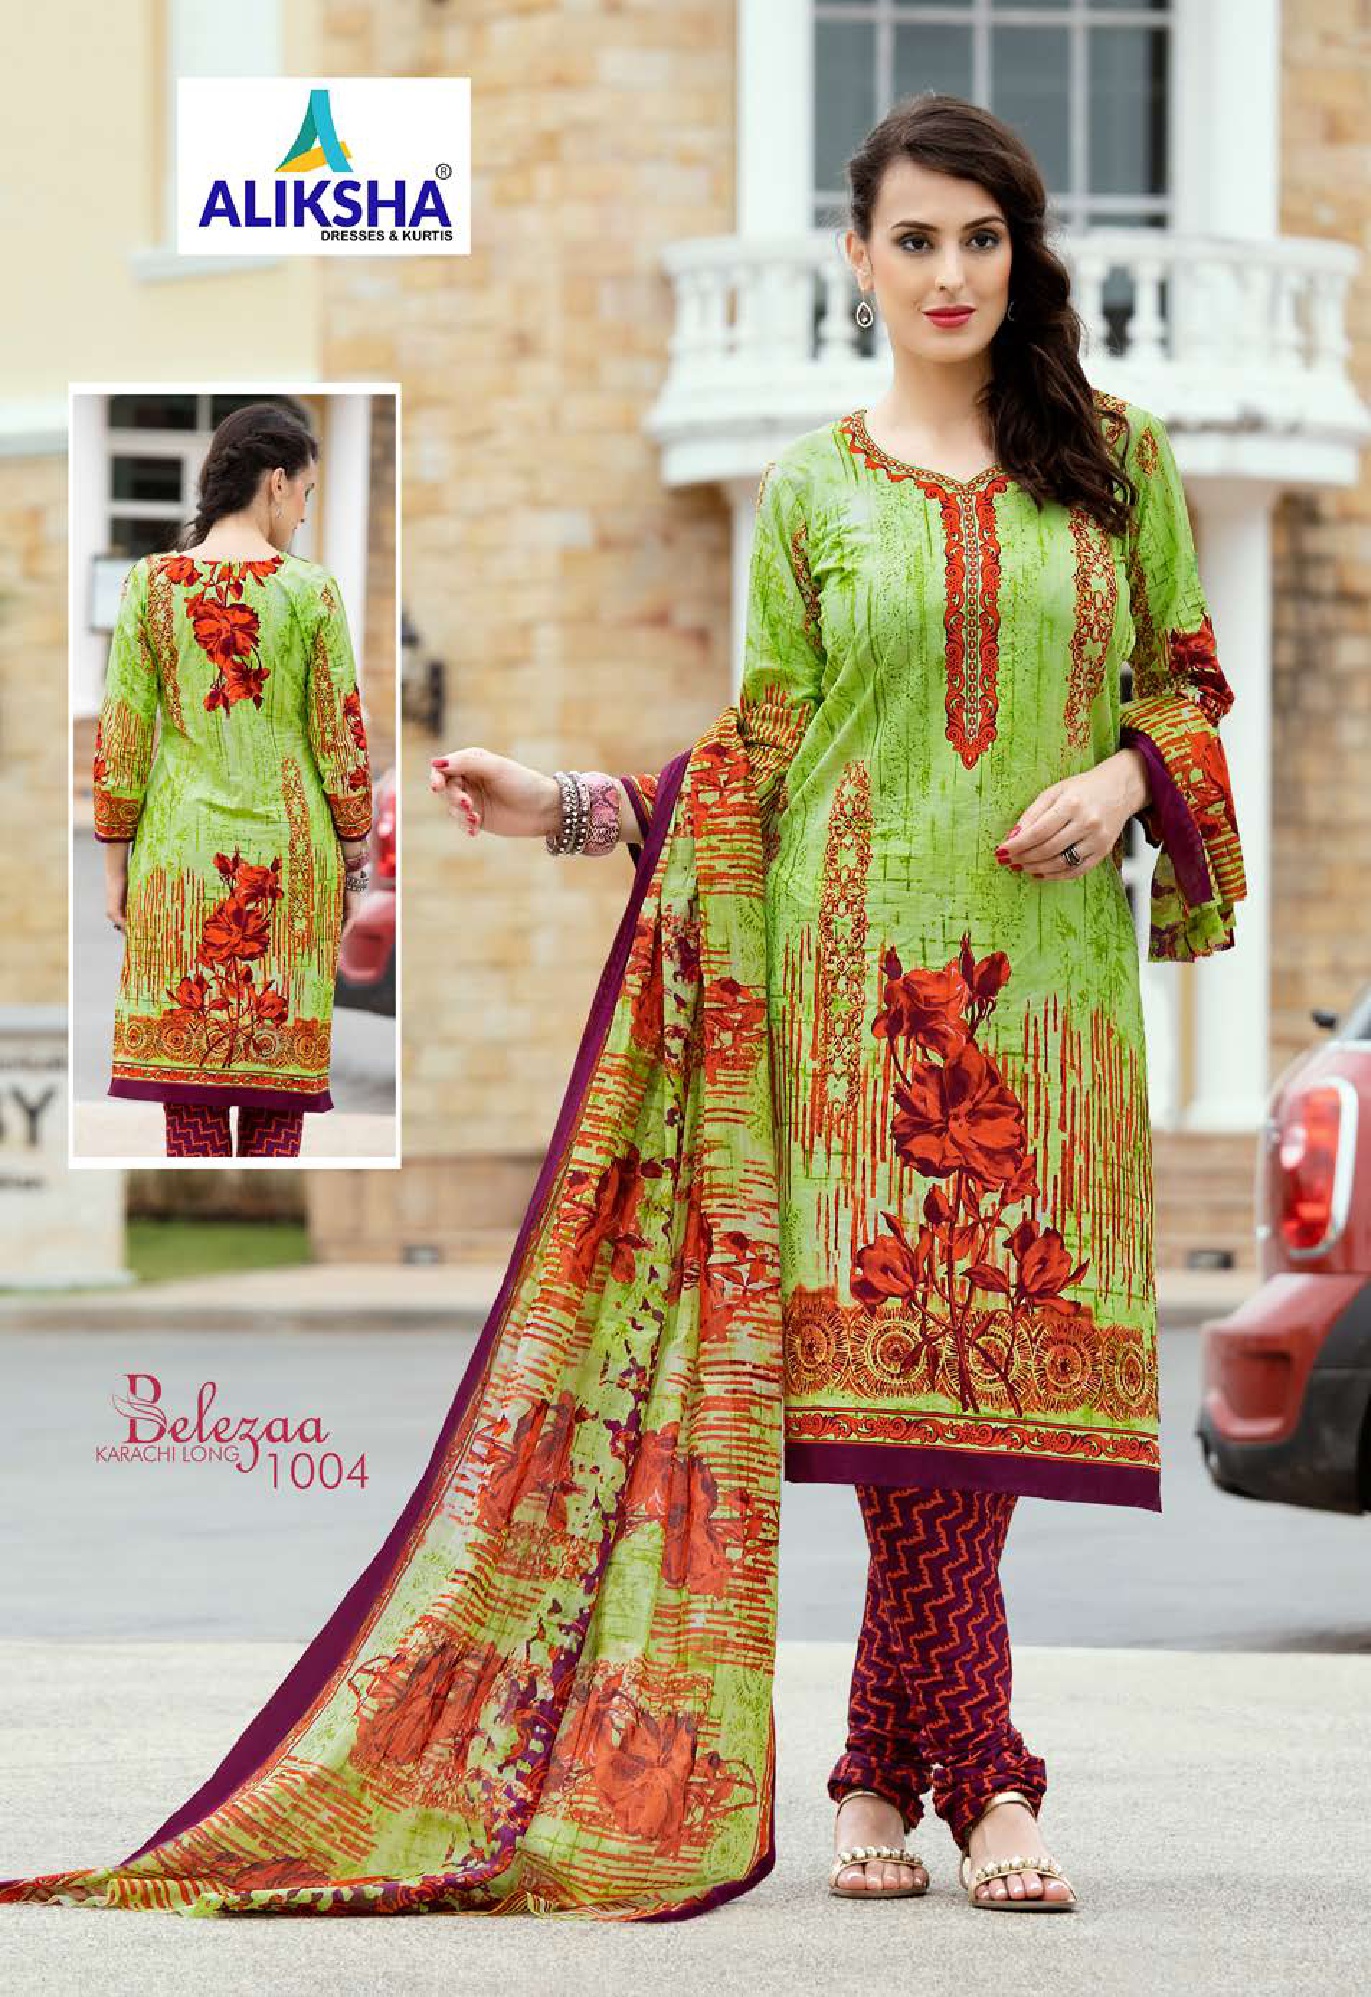 Belezaa Karachi Vol-1 By Aliksha 1001 To 1010 Series Beautiful Suits Stylish Fancy Colorful Party Wear & Ethnic Wear Cotton Printed Dresses At Wholesale Price